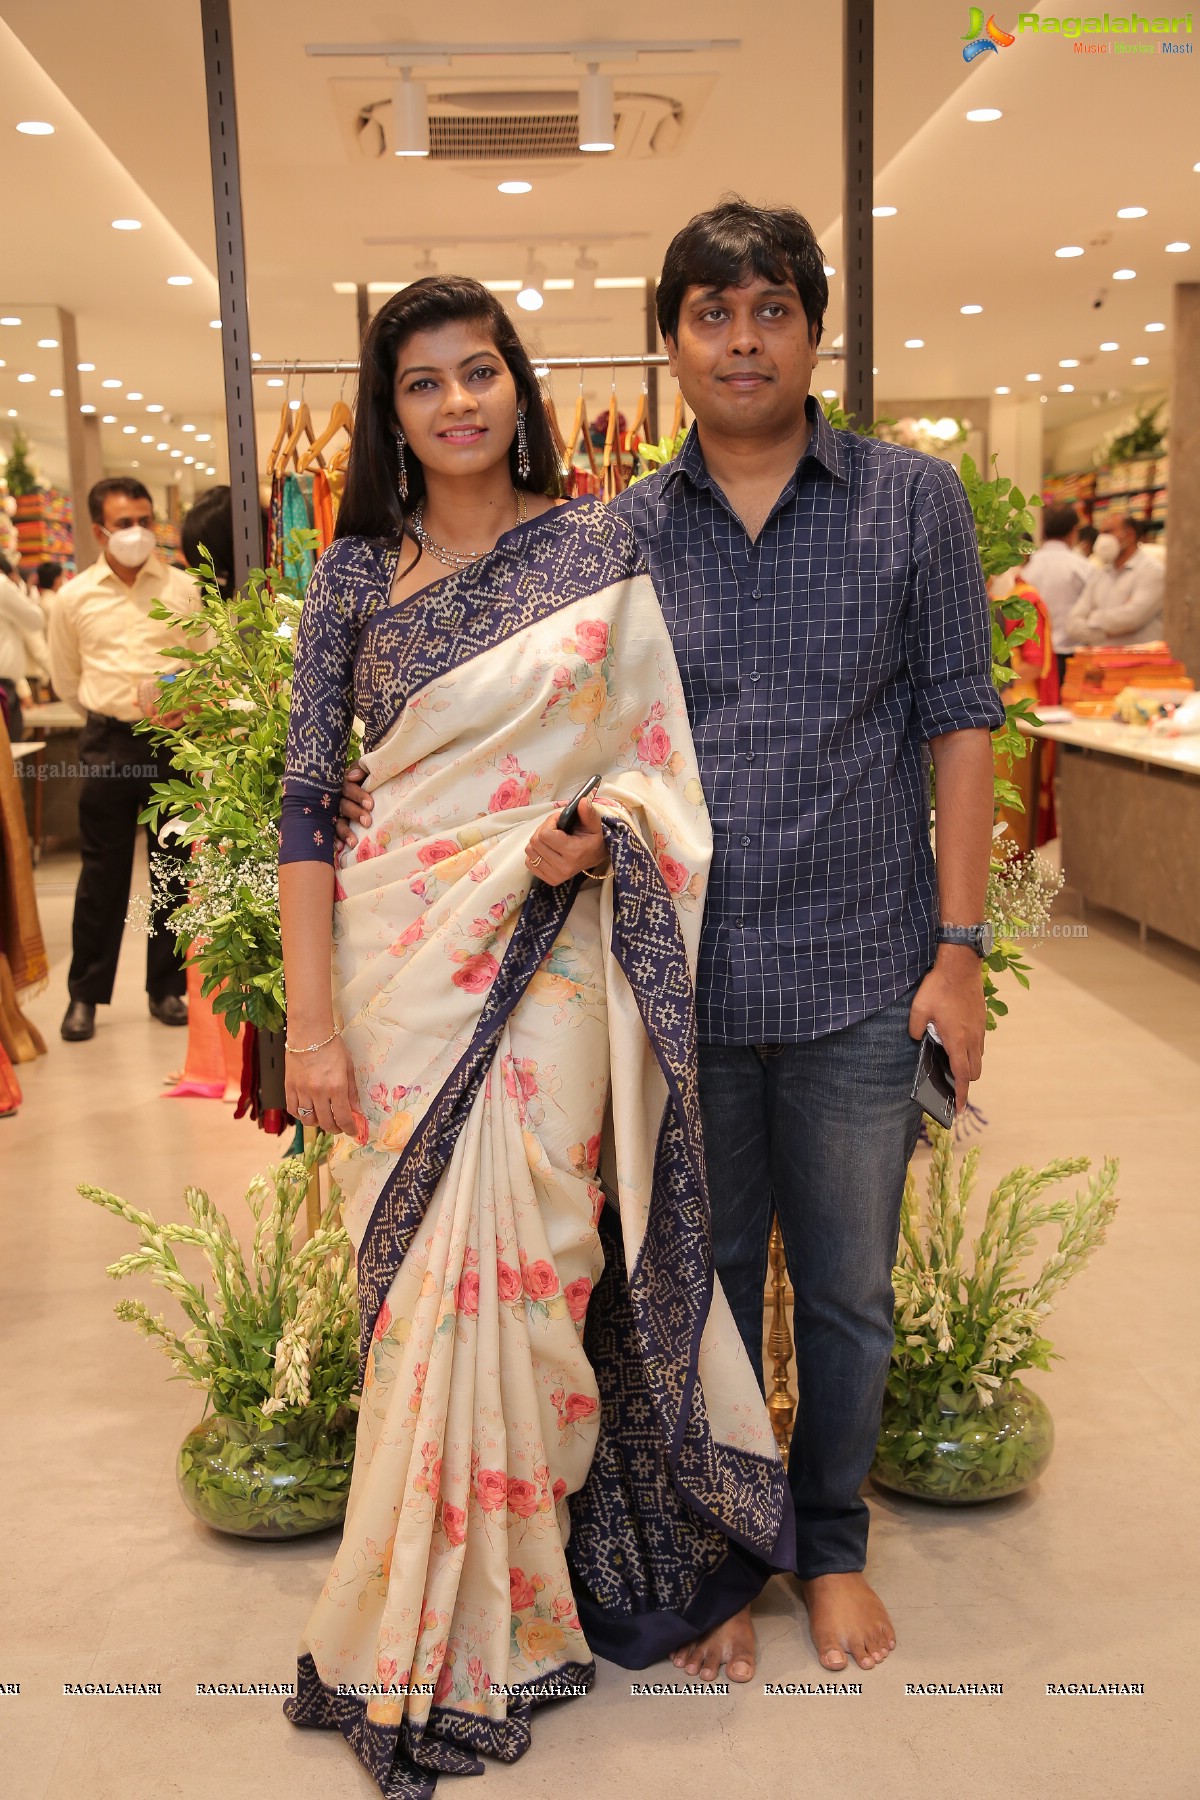 Queen of Sarees, Kankatala Launches 11th Retail Outlet in Kukatpally, Hyderabad